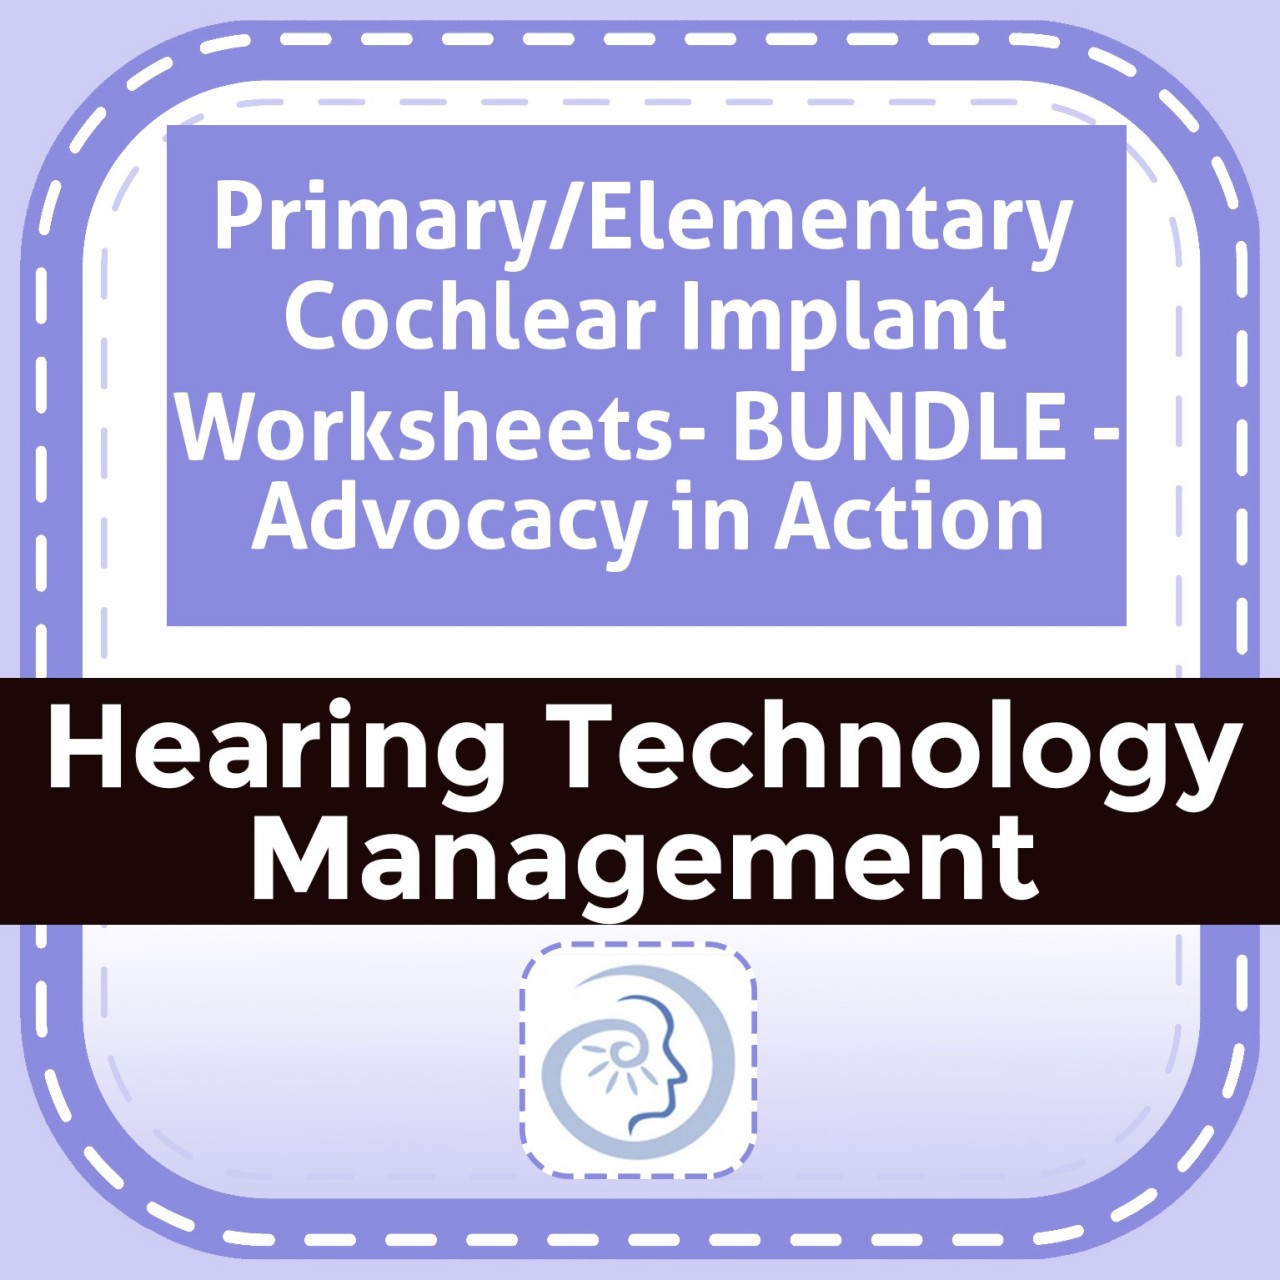 Primary/Elementary Cochlear Implant Worksheets- BUNDLE - Advocacy in Action